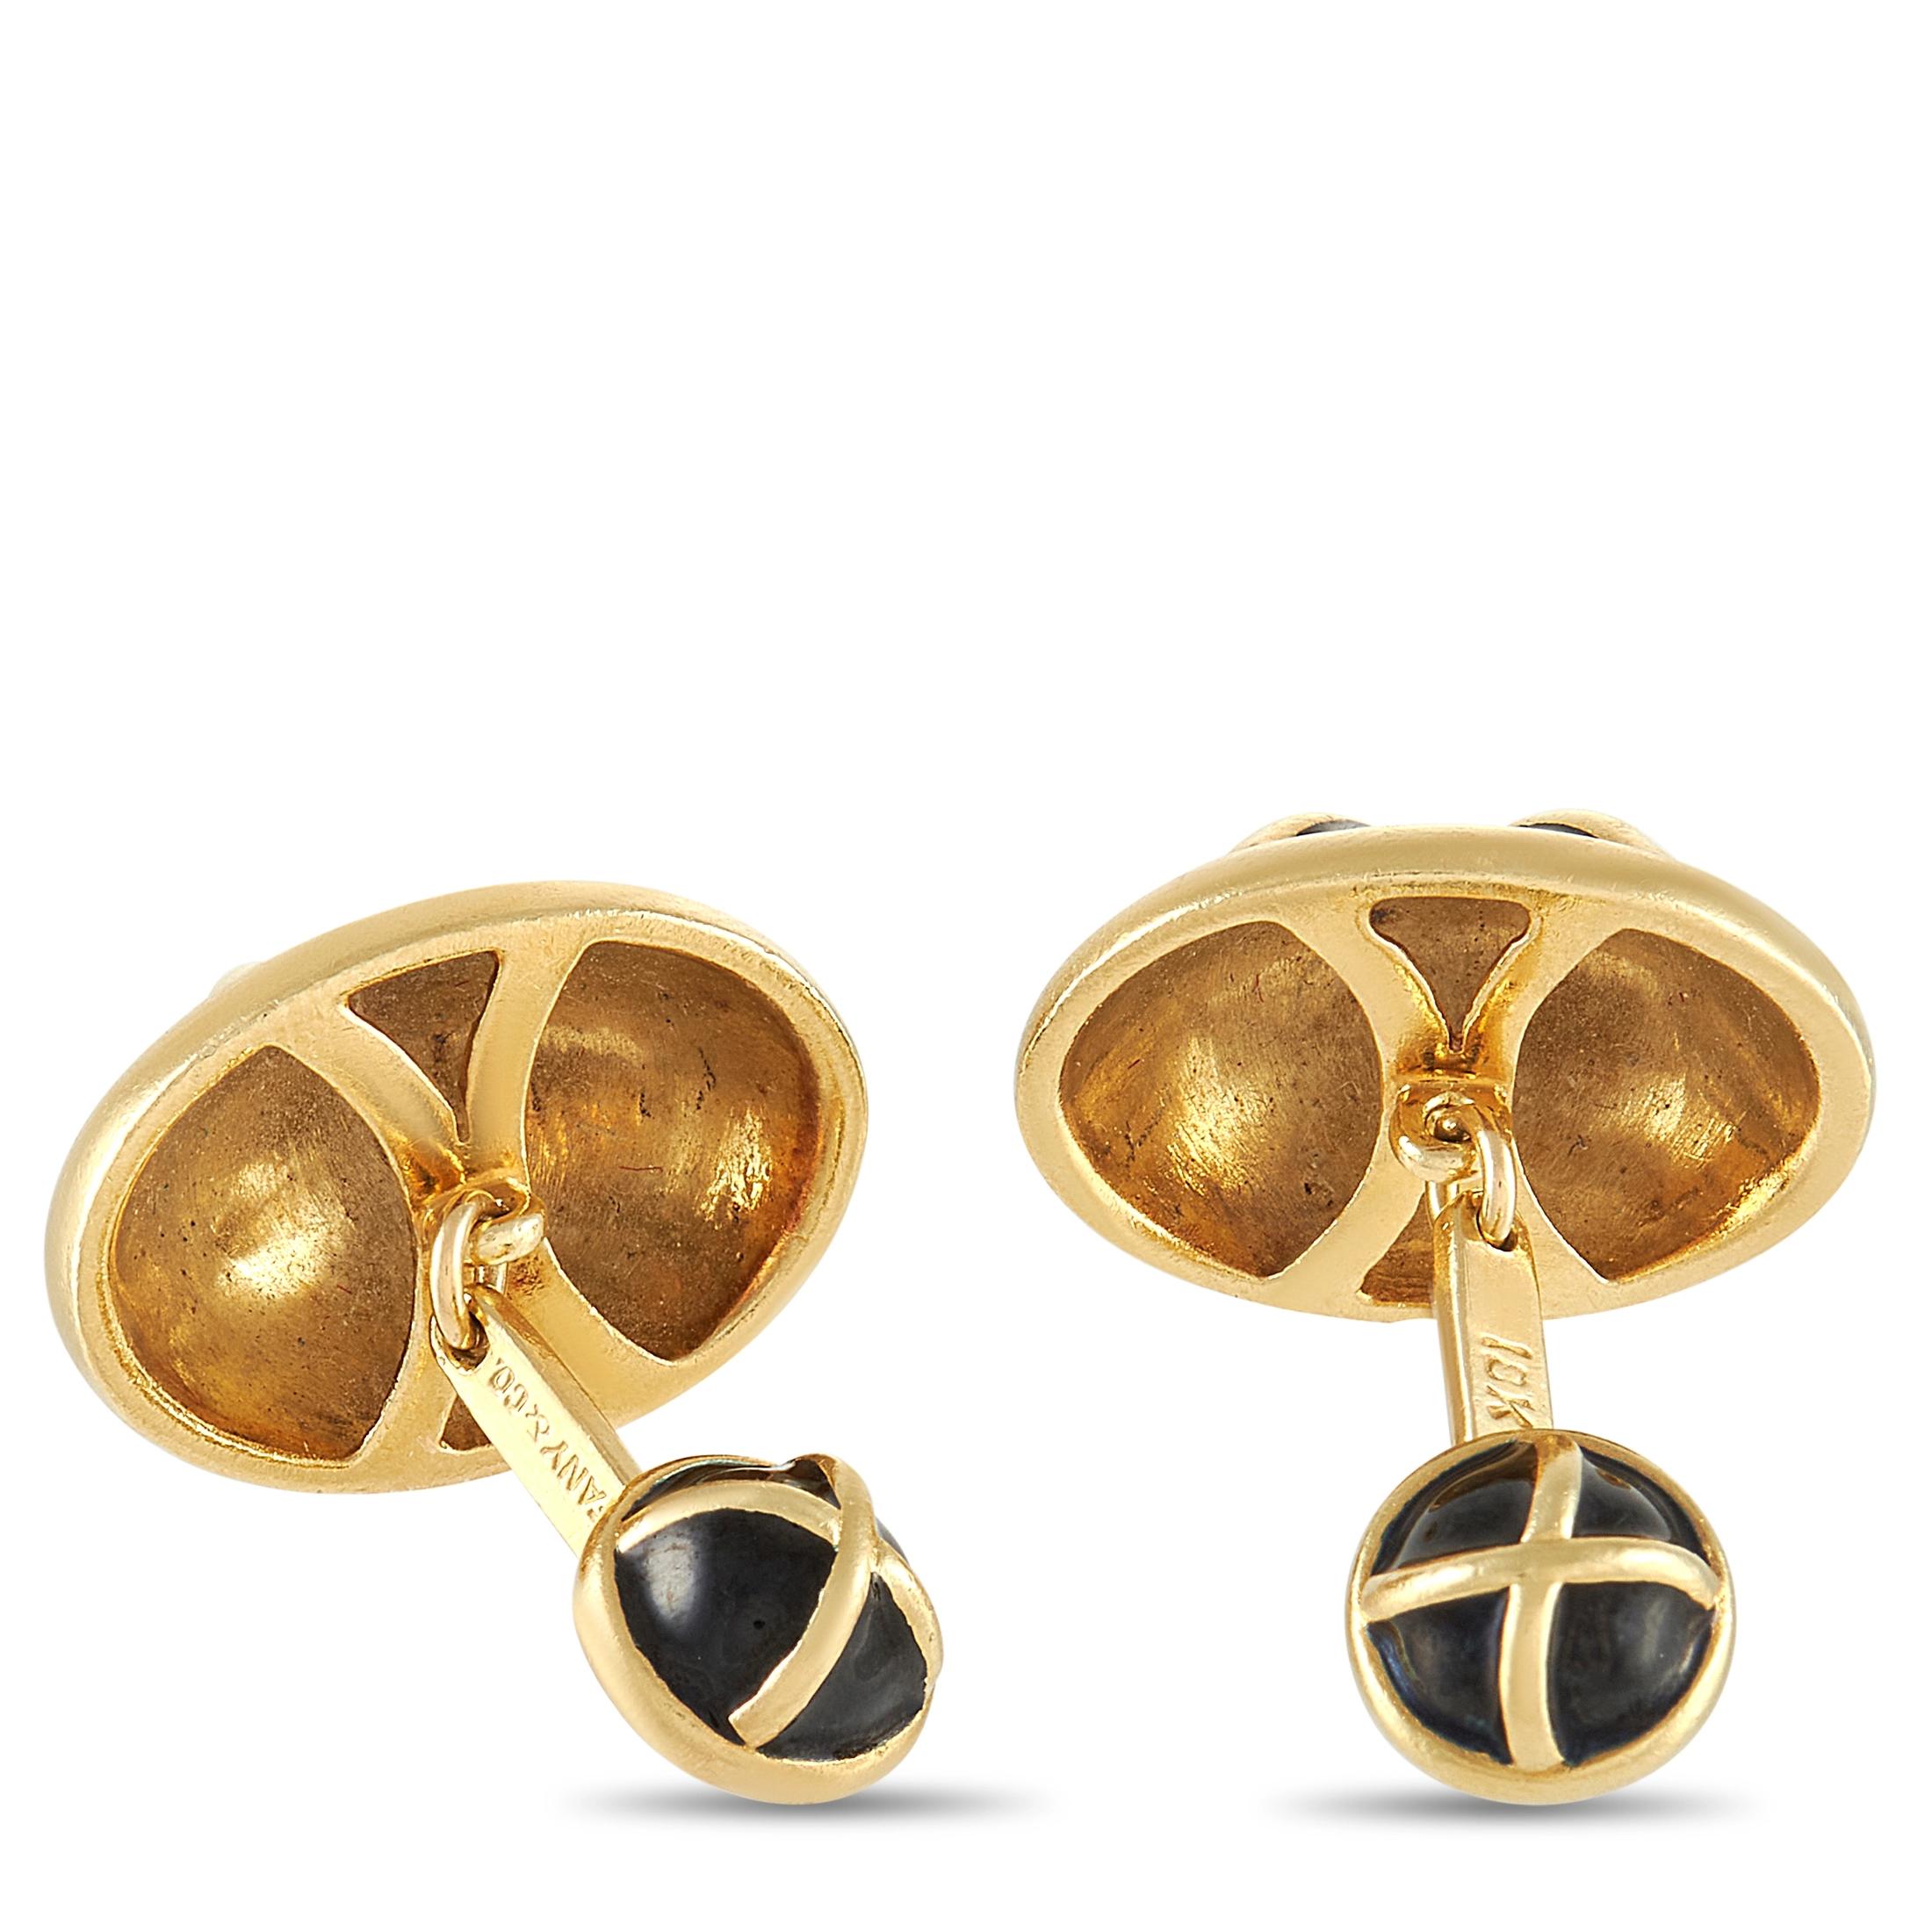 These sleek cufflinks from Tiffany & Co. are poised to put the perfect finishing touch on any suited look. Rounded black enamel ovals are only highlighted by 18K Yellow Gold bands and an 18K Yellow Gold base. Each one of these sophisticated